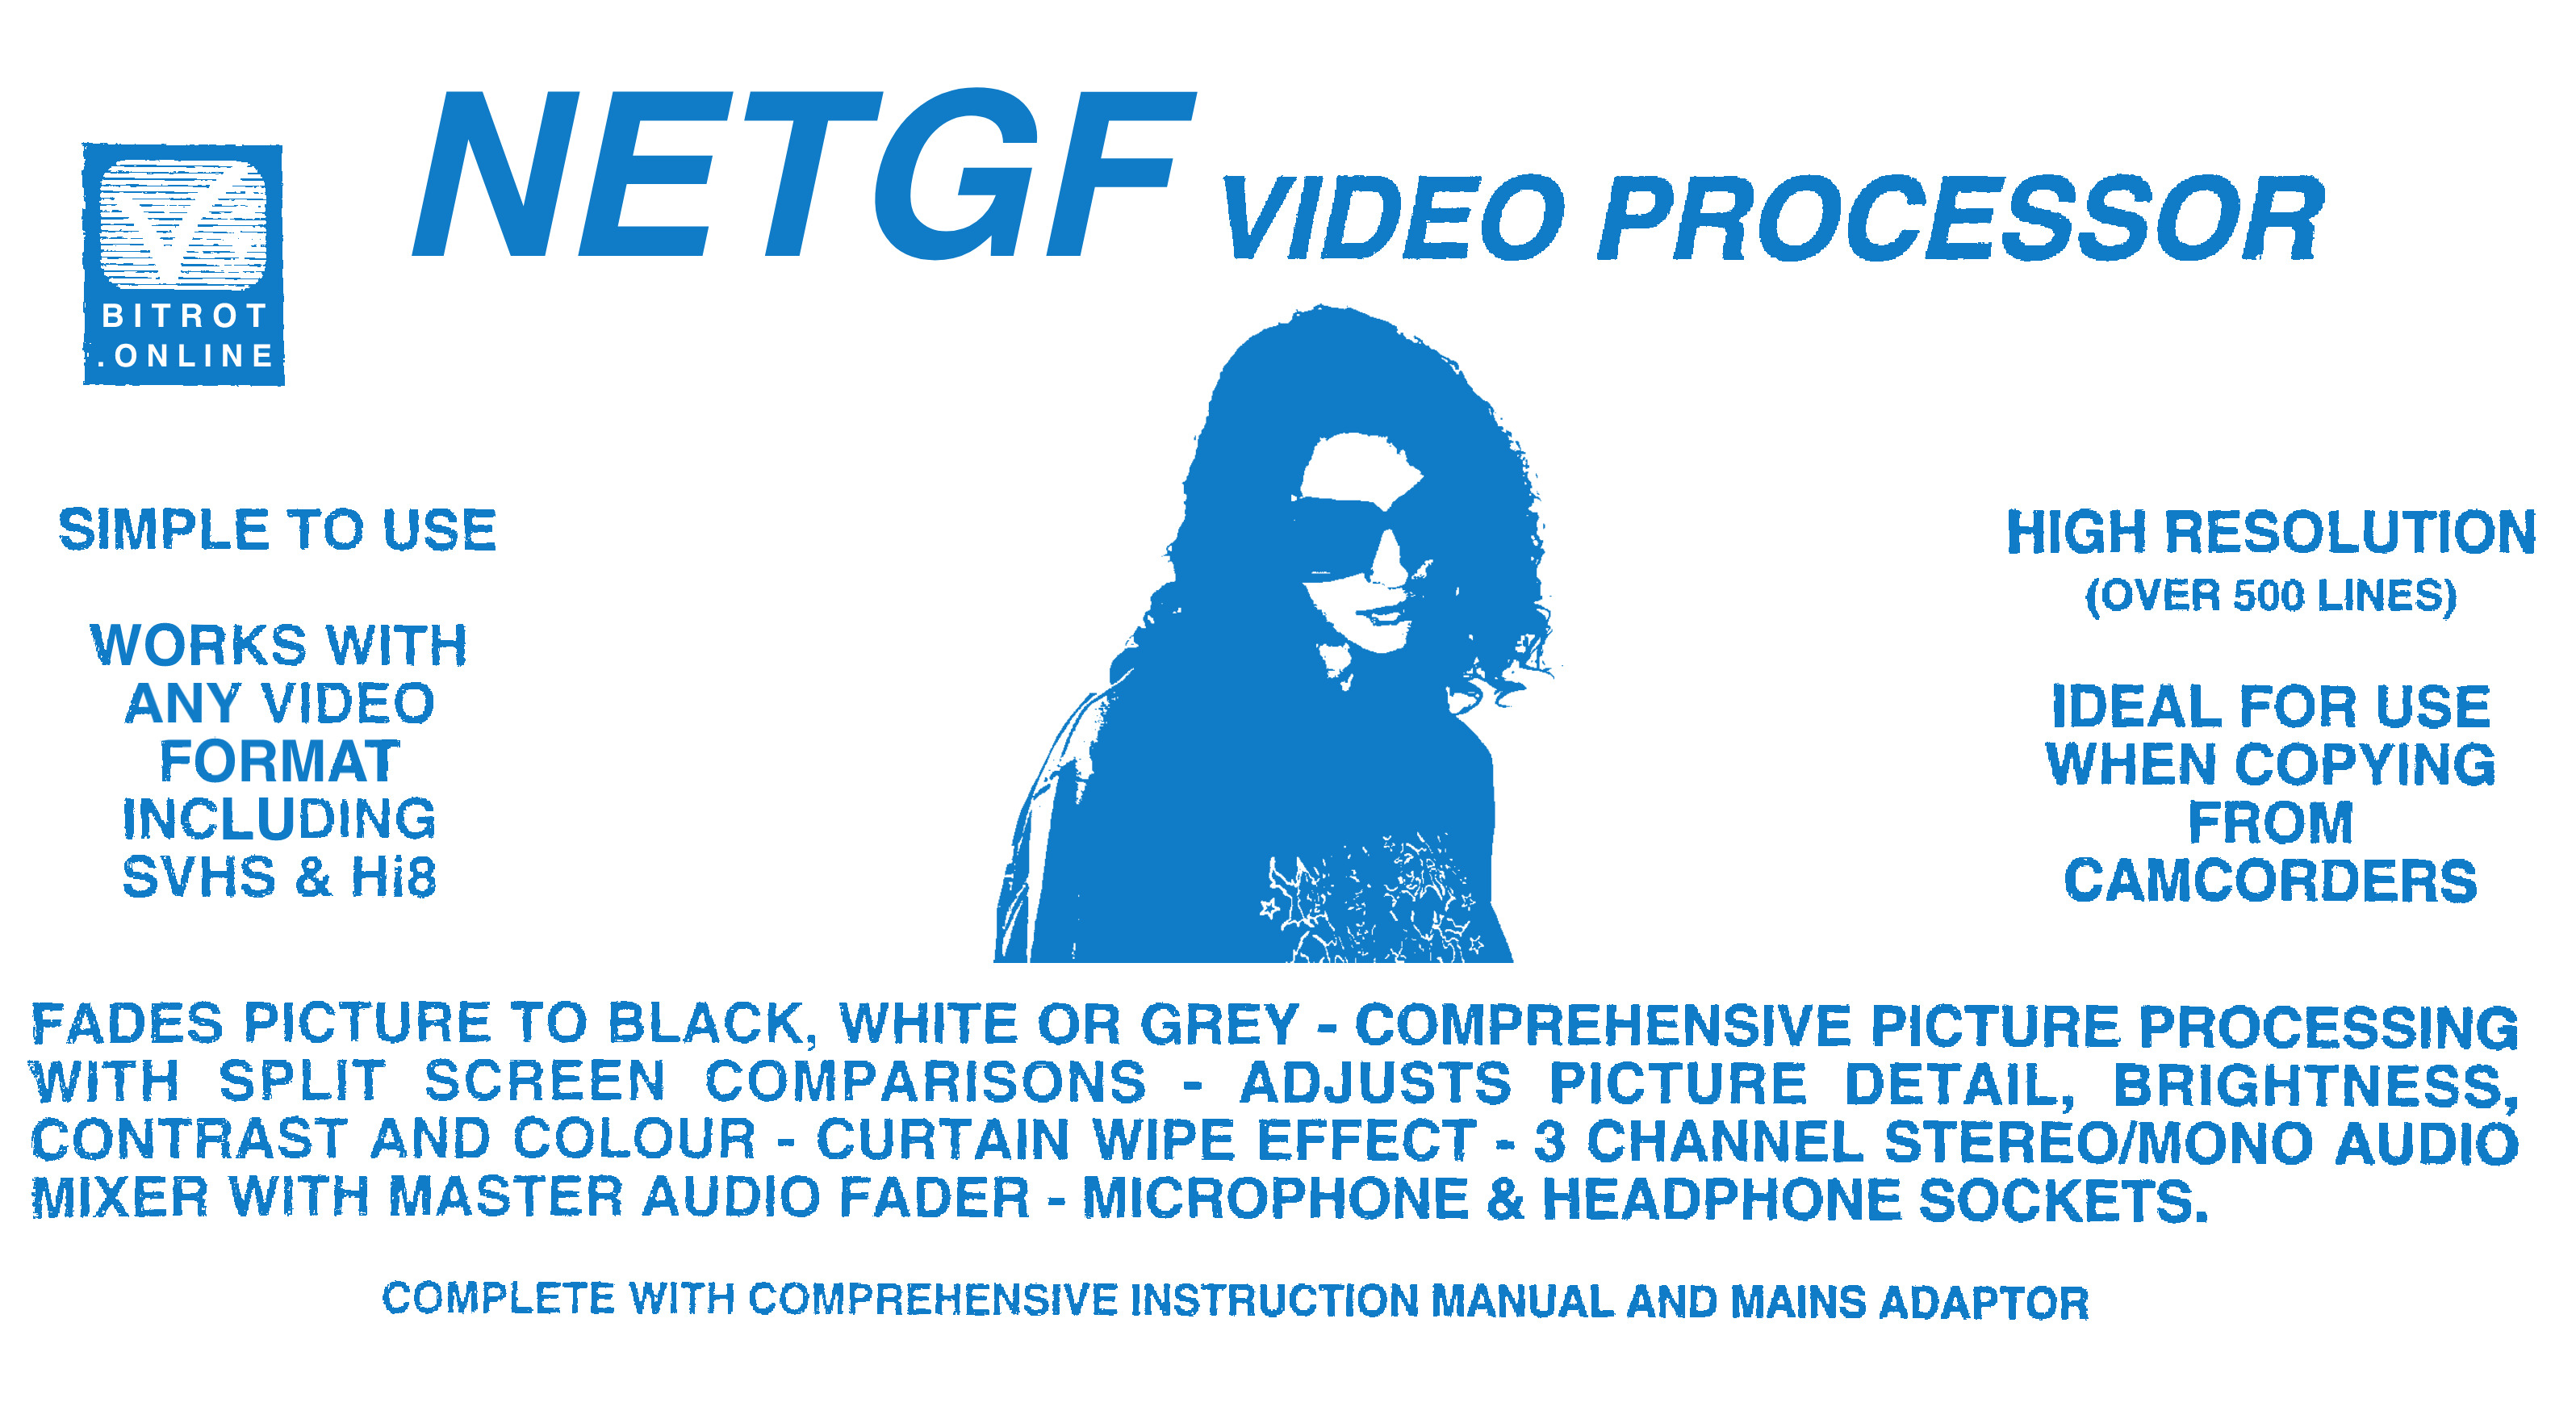 edited copy of 90s video processor packaging. text: bitrot.online netgf video processor. simple to use. works with any video format including svhs & hi8. high resolution (over 500 lines). ideal for use when copying from camcorders. fades picture to black, white or grey - comprehensive picture processing with split screen comparisons - adjusts picture detail, brightness, contrast and colour - curtain wipe effect - 3 channel stereo/mono audio mixer with master audio fader - microphone & headphone sockets. complete with comprehensive instruction manual and mains adaptor